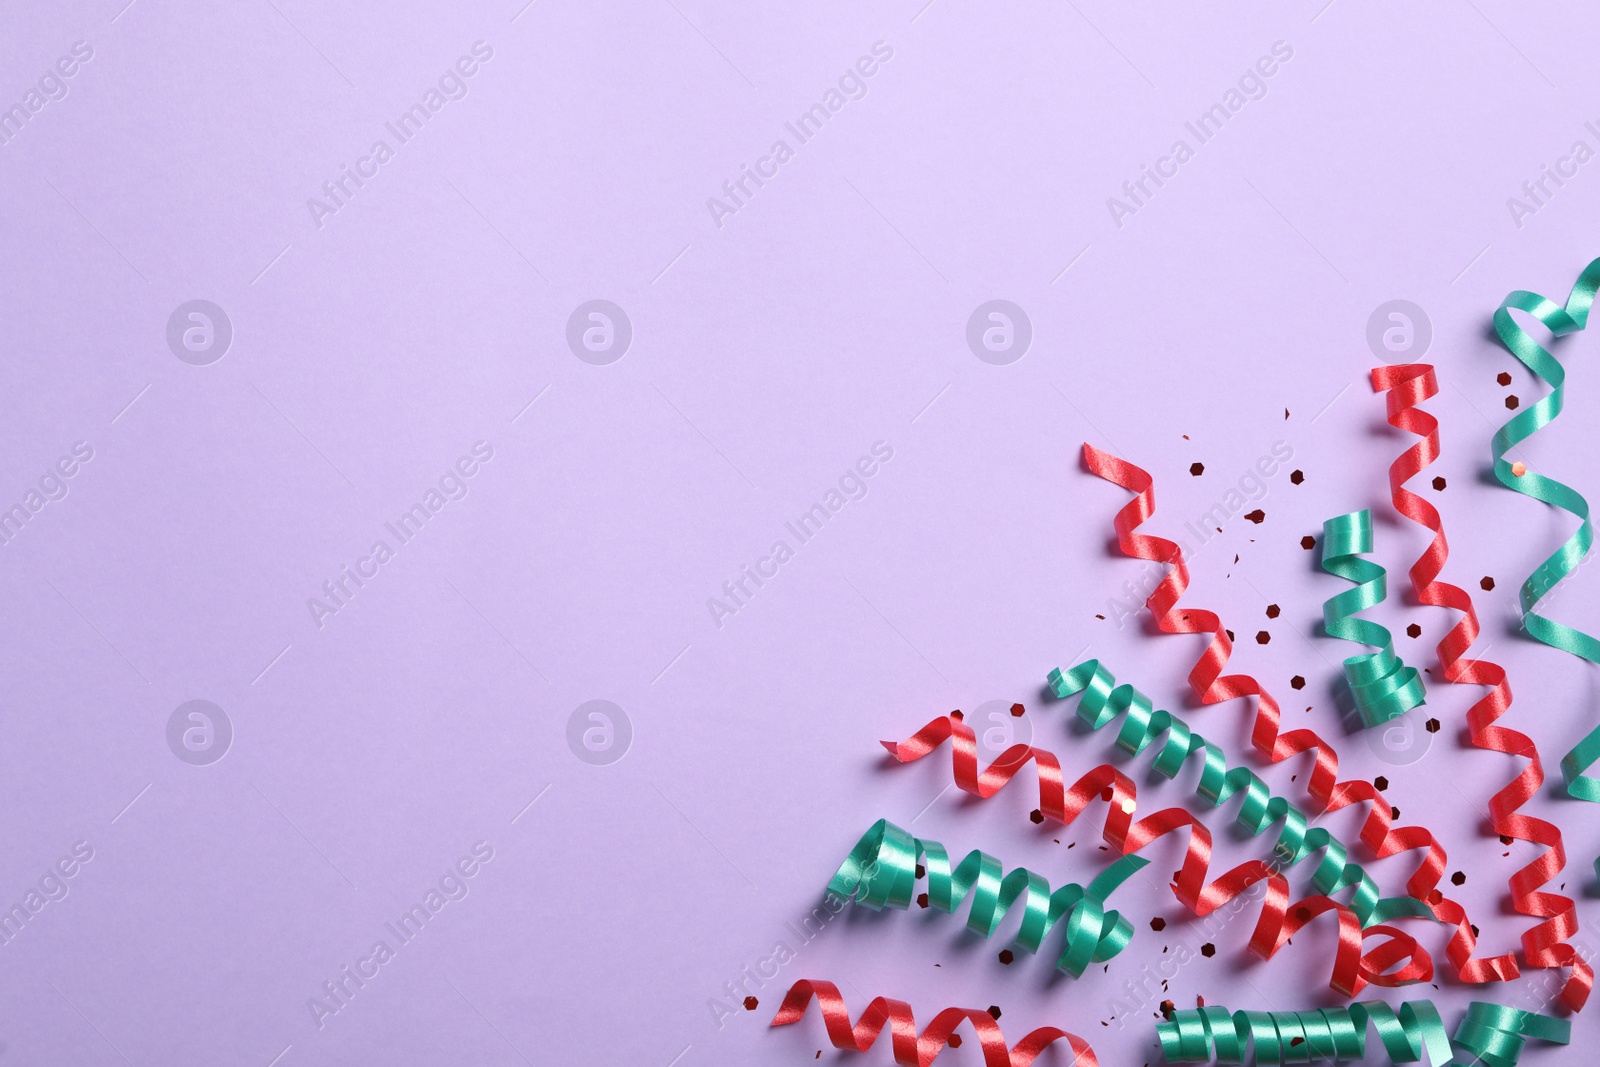 Photo of Colorful serpentine streamers and confetti on light background, flat lay. Space for text